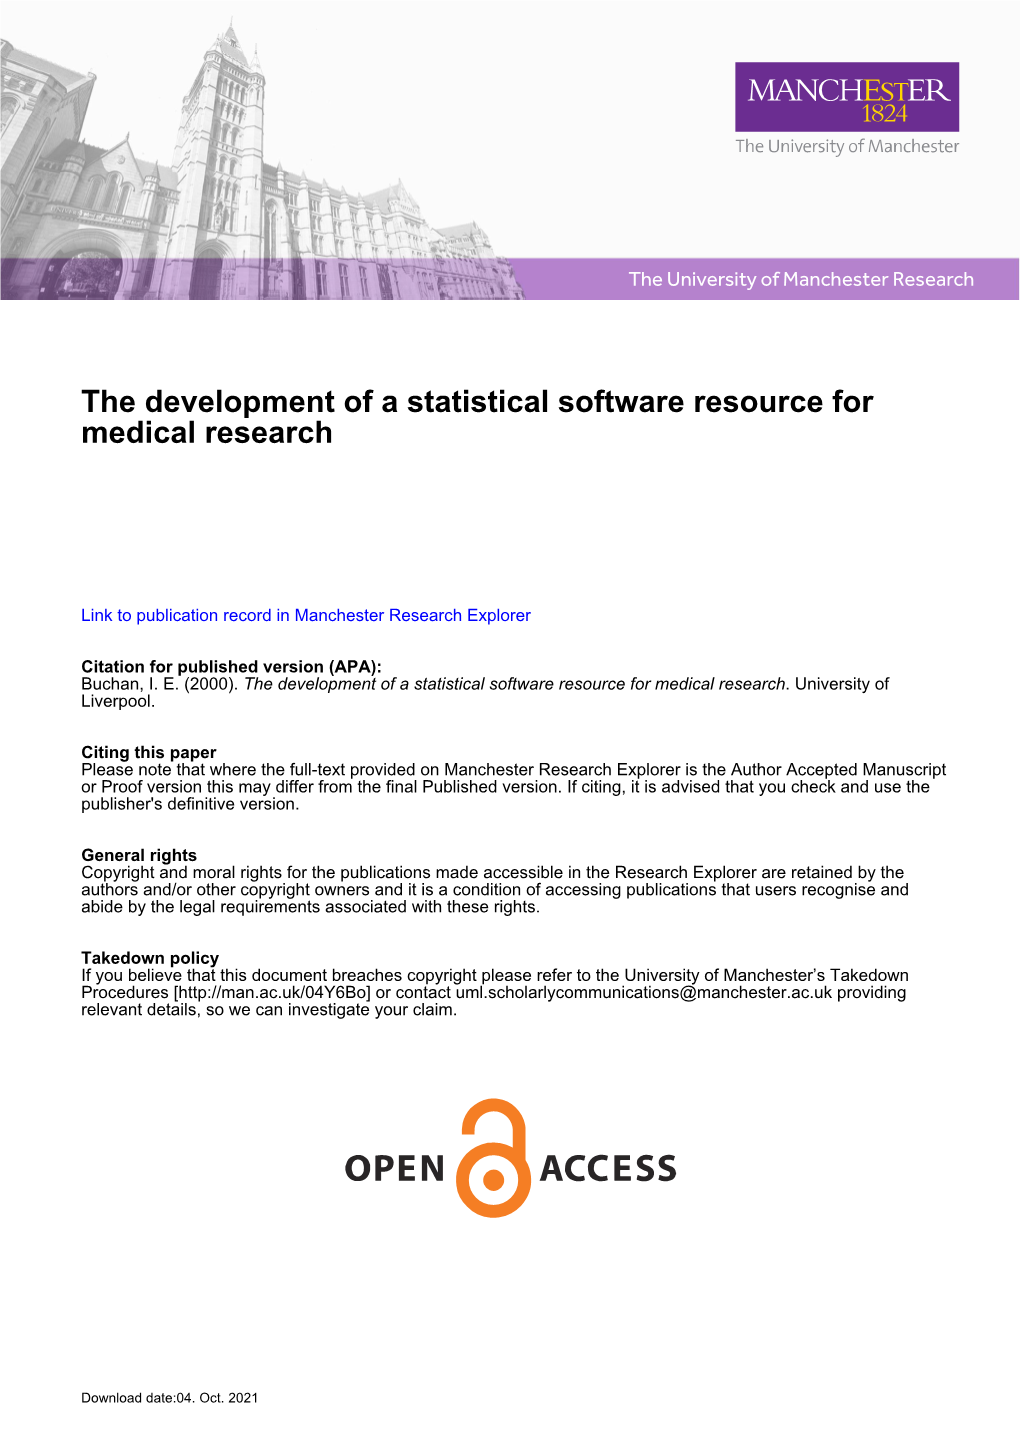 The Development of a Statistical Software Resource for Medical Research